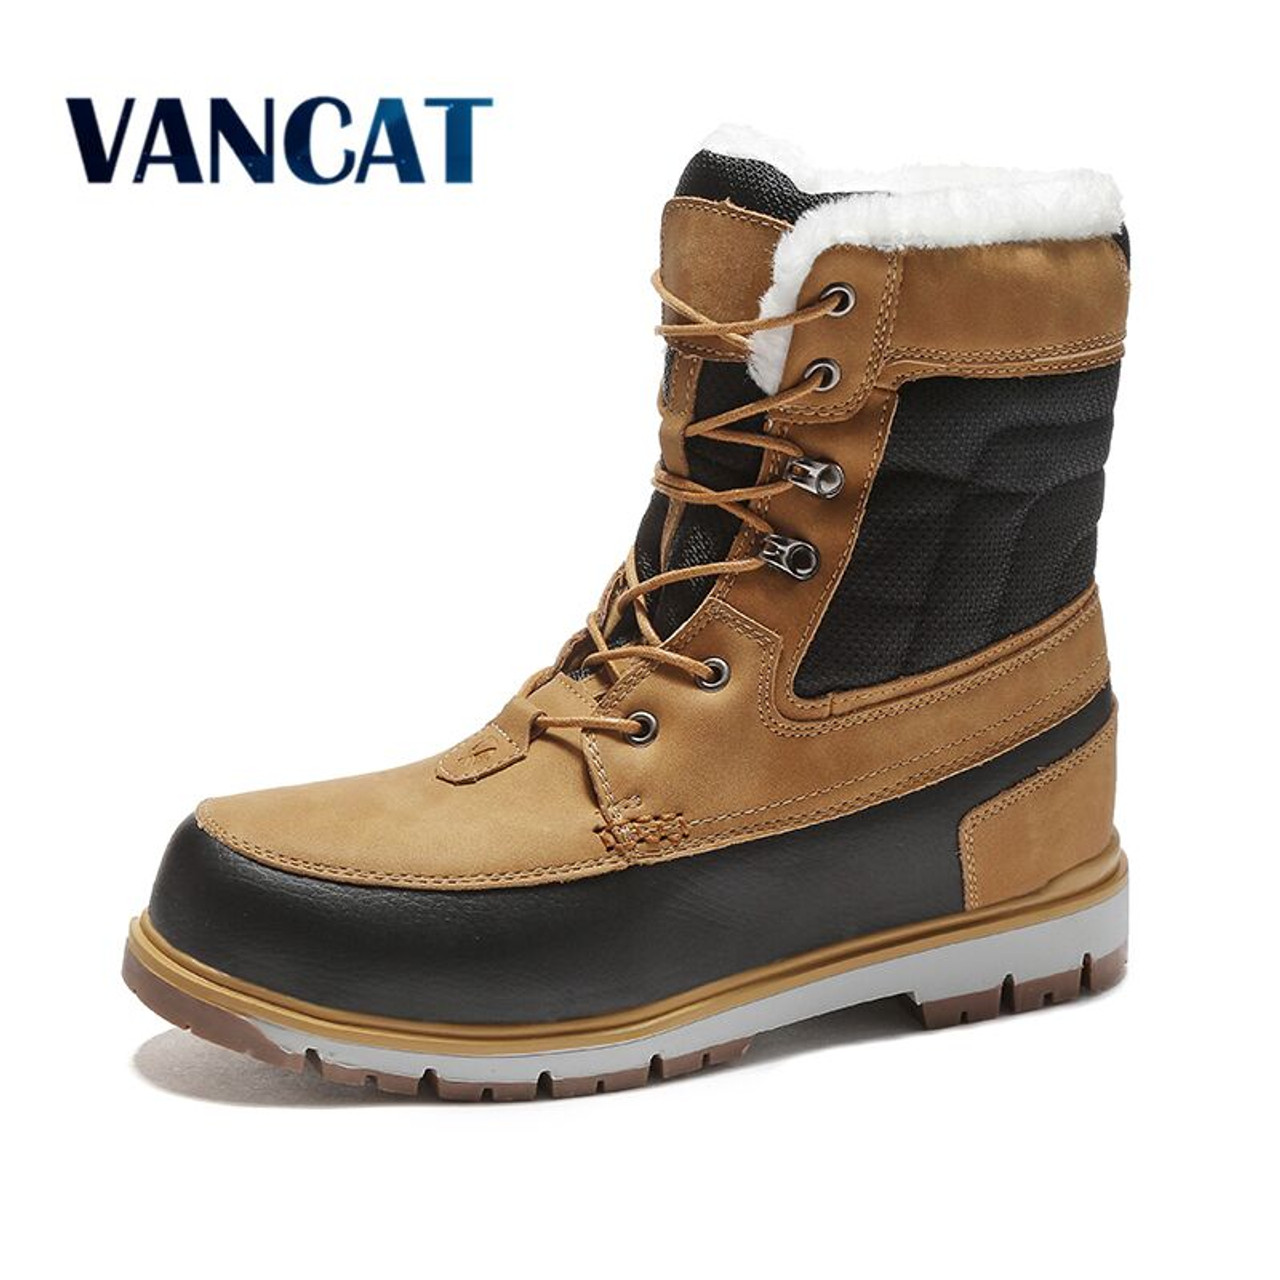 waterproof ankle boots mens